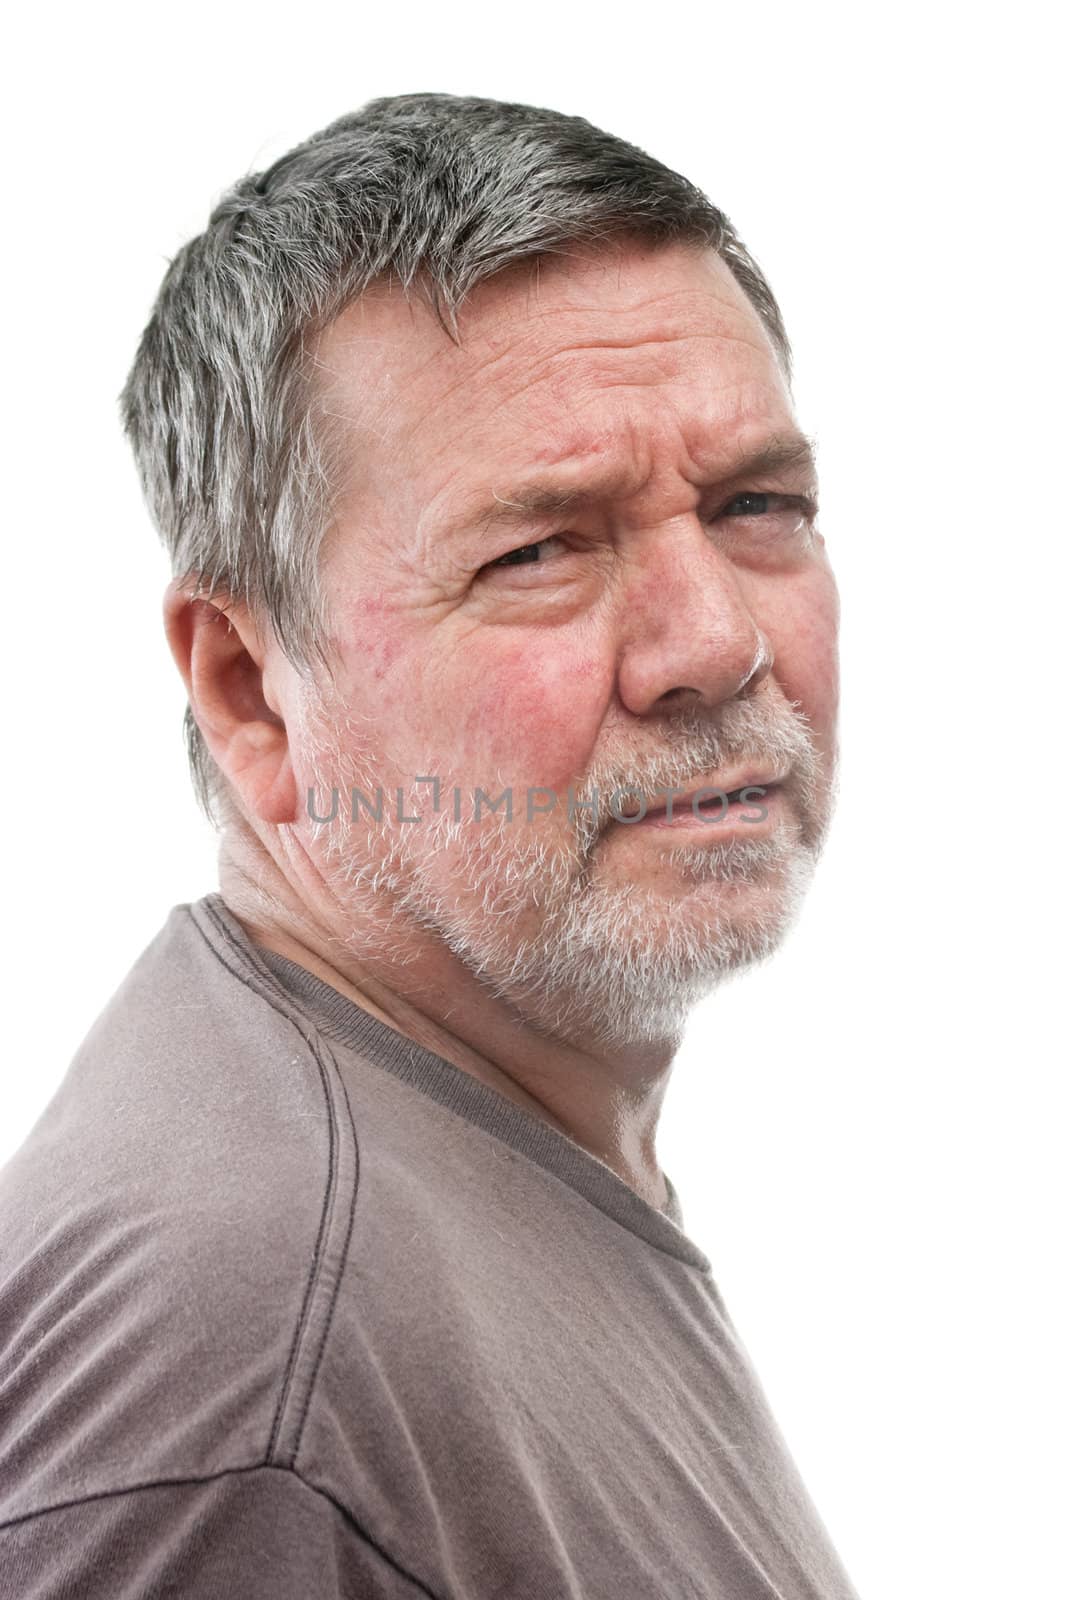 Mature man of 58 years, with white stubbly beard, 2/3 view head & shoulders, isolated on white